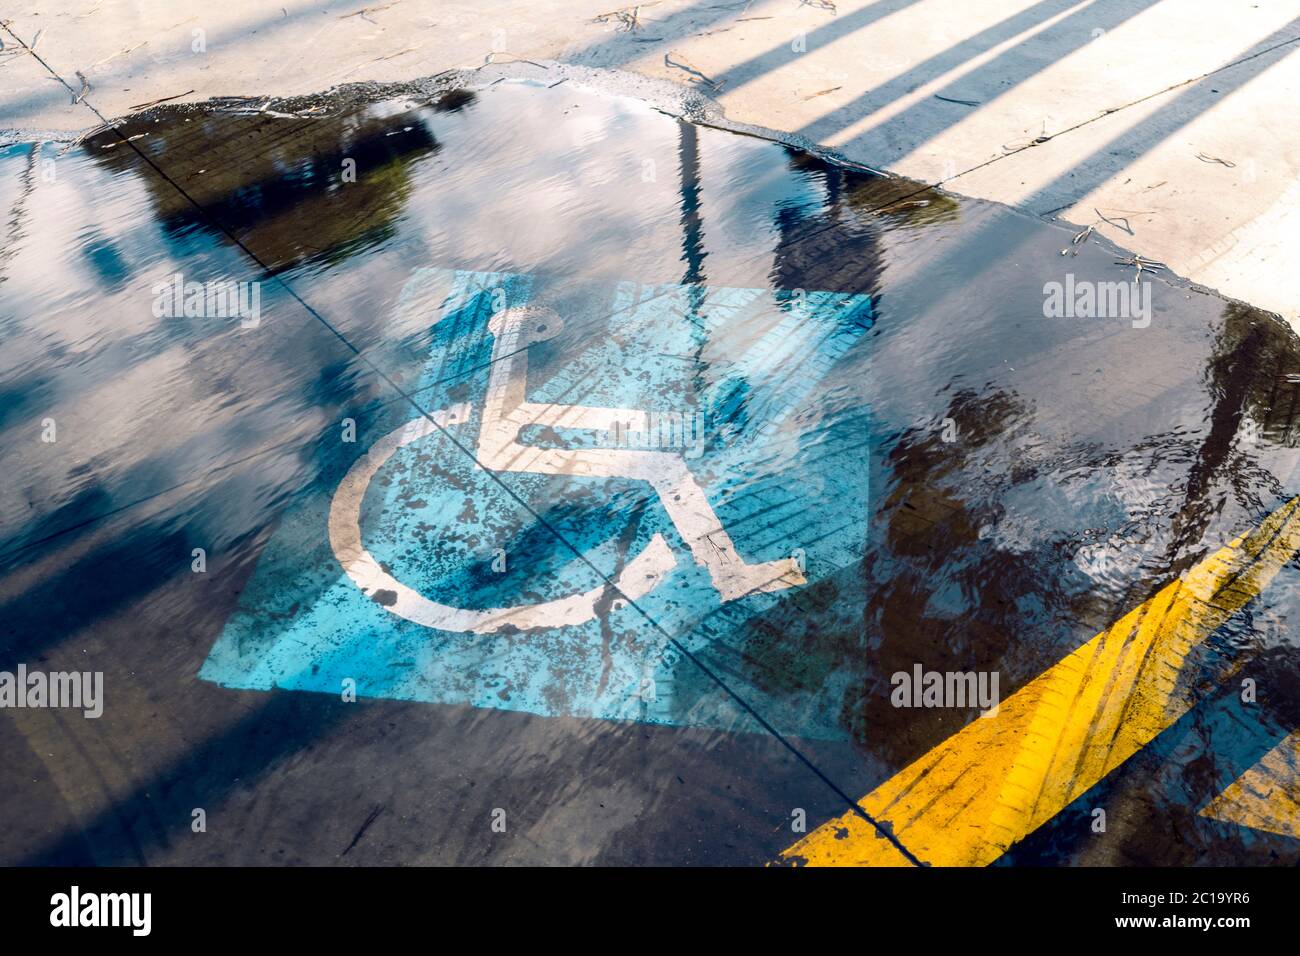 Flooded handicapped sign on the outdoor urban parking lot. Stock Photo